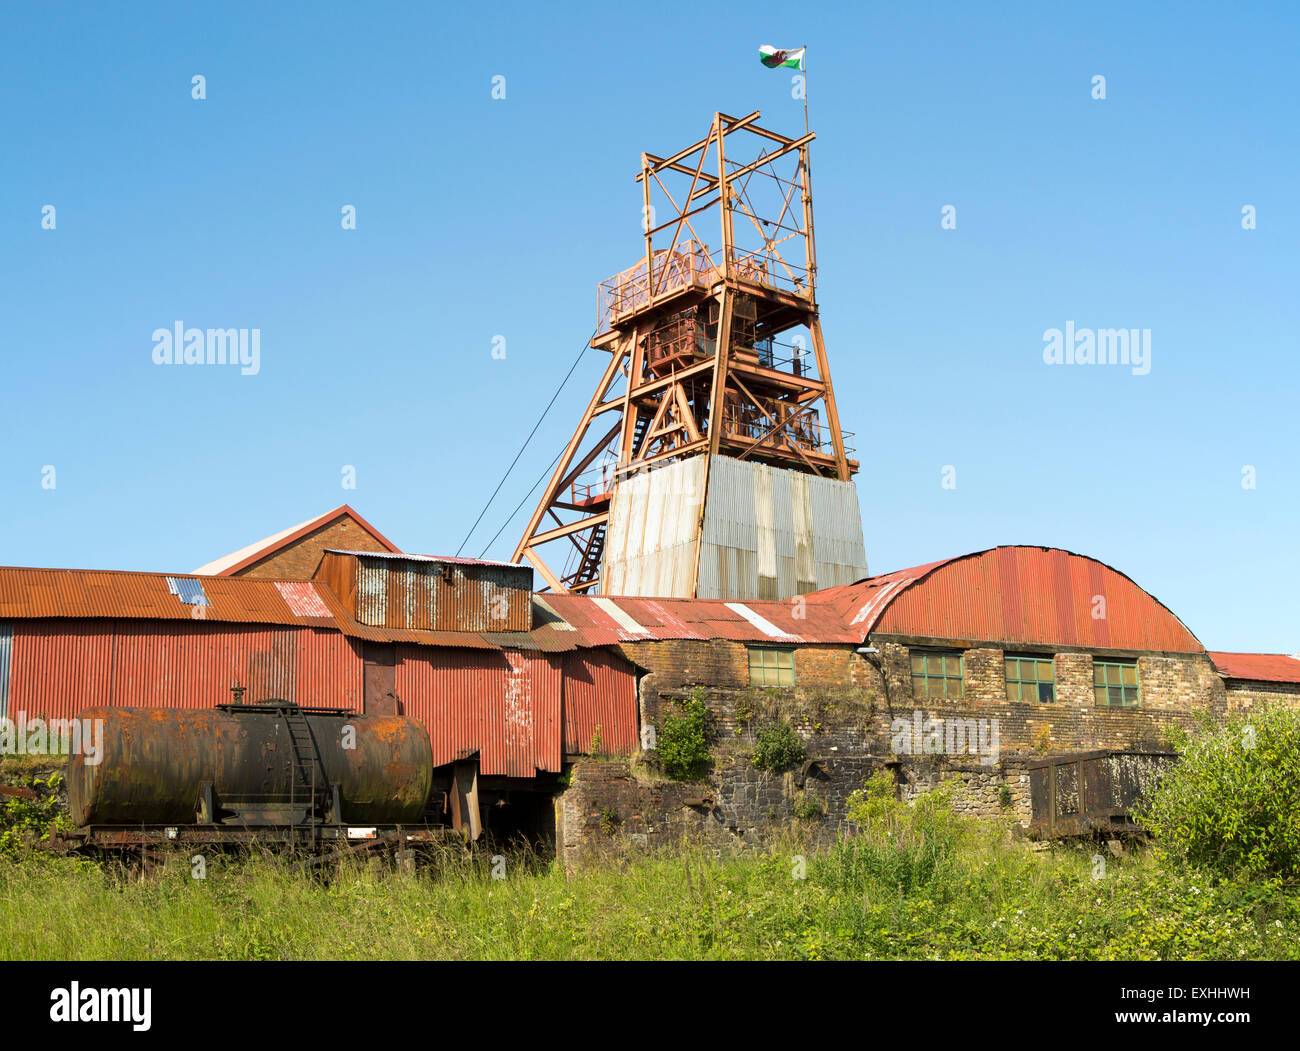 Big Pit National Coal Museum, Blaenavon, Torfaen, Monmouthshire, South Wales, UK Stock Photo